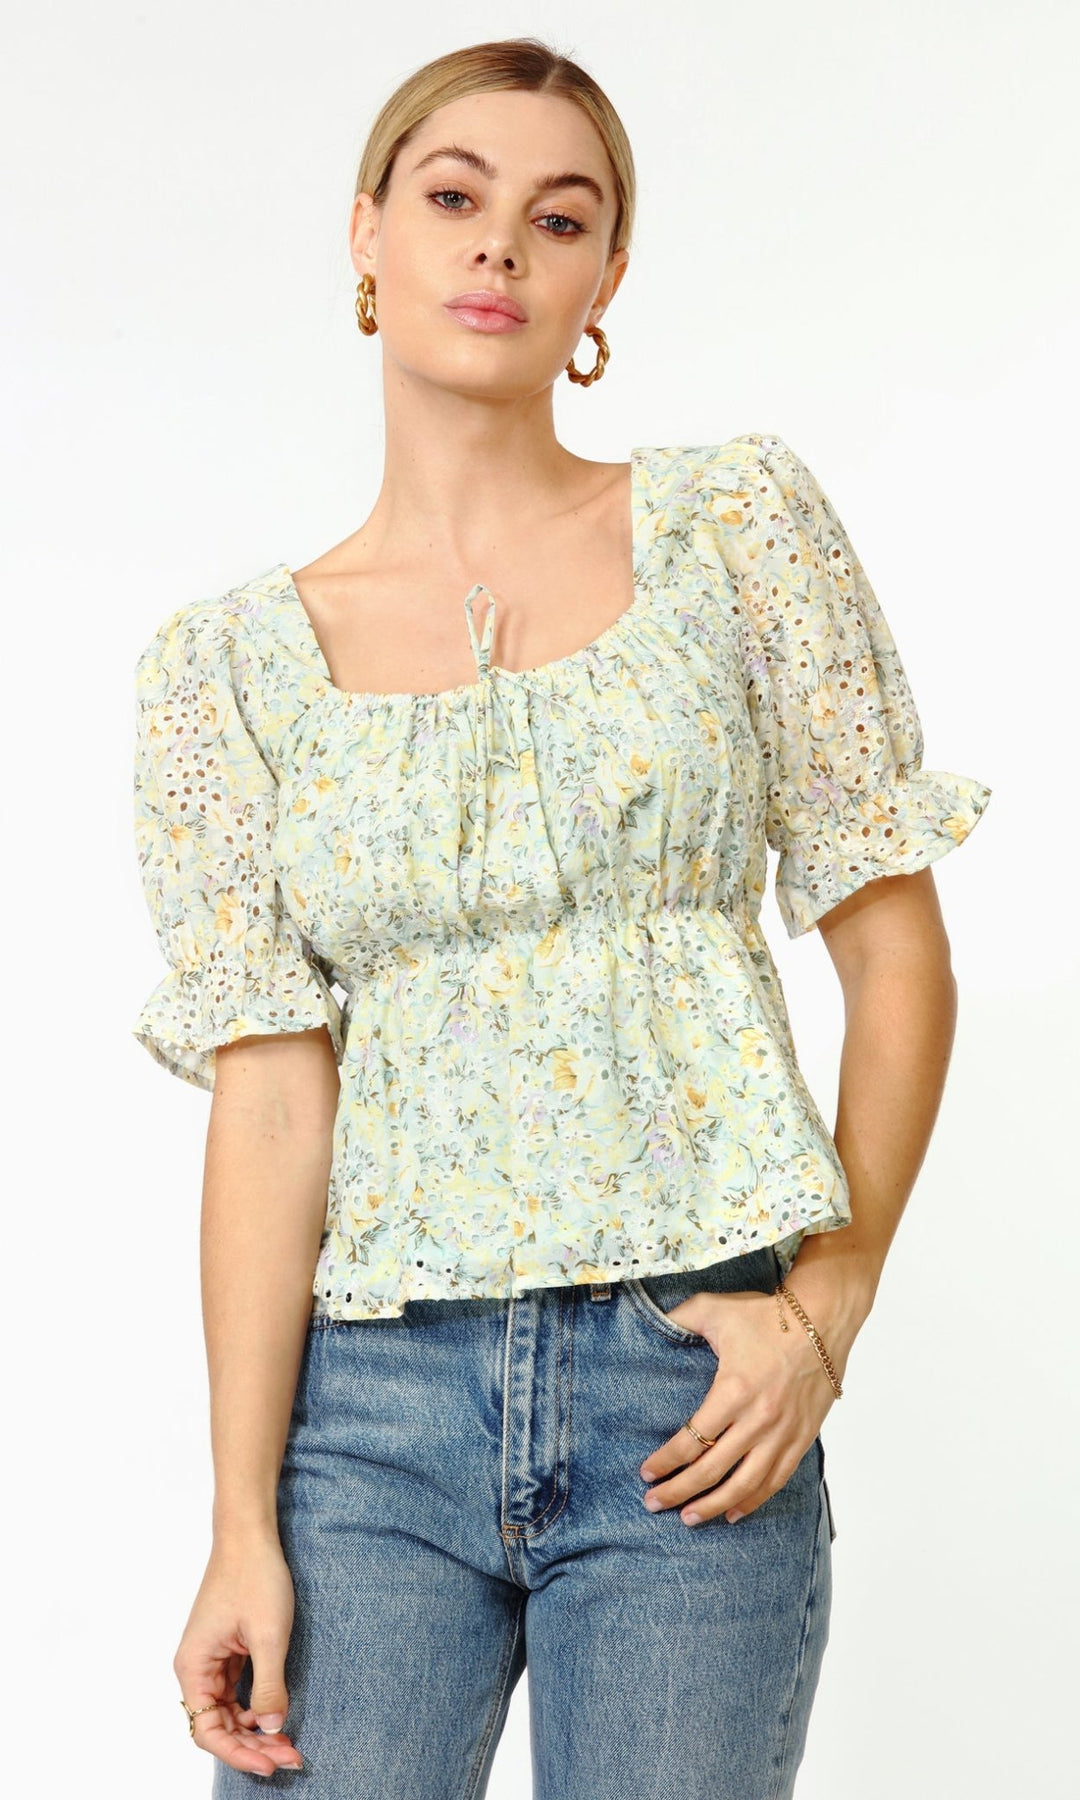 Greylin - Elsa Embroidered Puff Sleeve Blouse: Aqua Mint - Shorely Chic Boutique